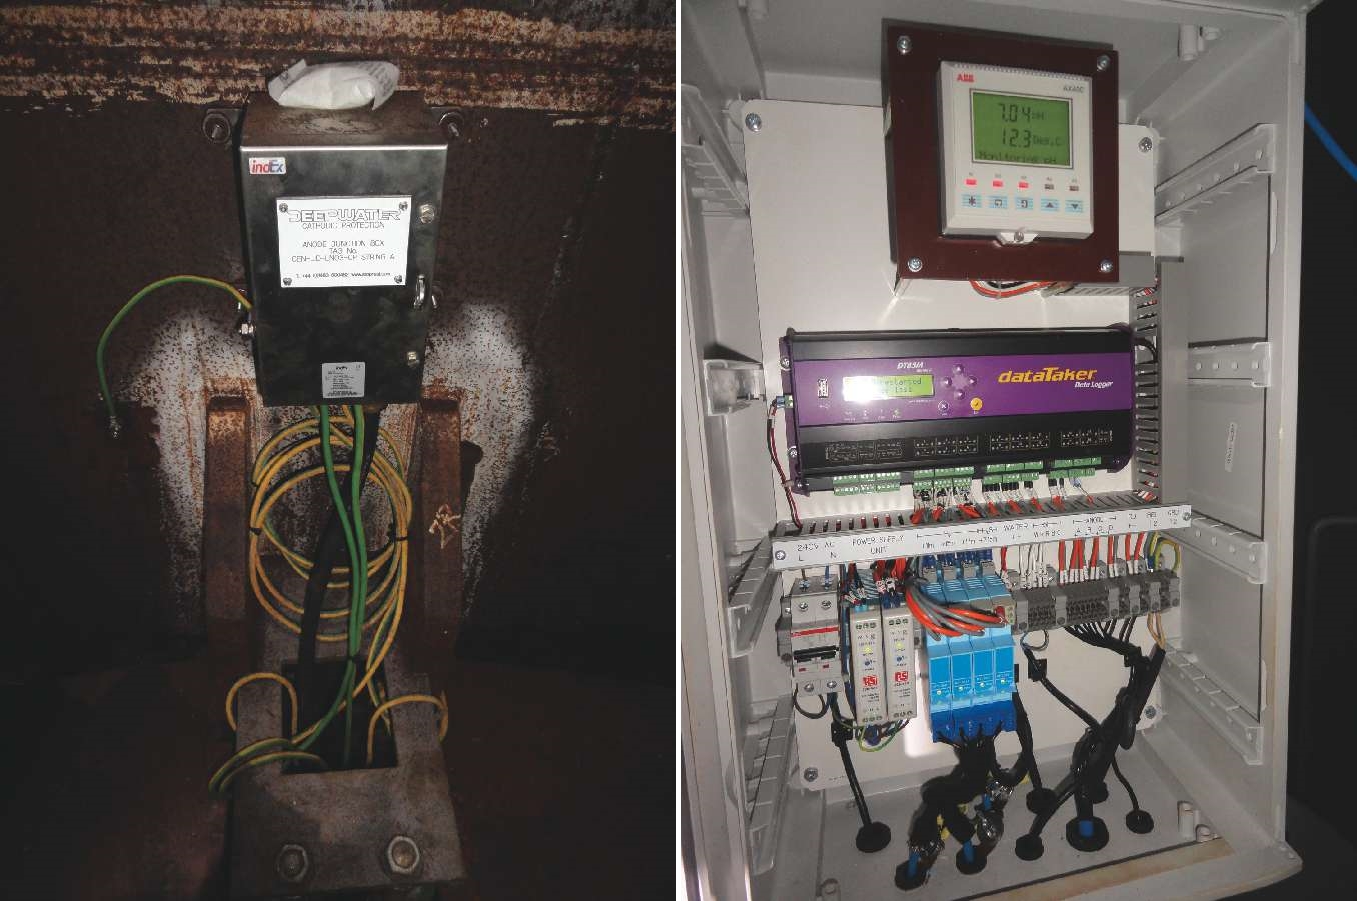 The junction box (left), installed above the lower platform, connects the anodes to the structure. Right, the monitoring system collects data from hydrogen sensors, a CD plate, pH probe, dissolved oxygen probe, and current input monitor to confirm the operation of a ventilation system. Photos courtesy of Alex Delwiche.